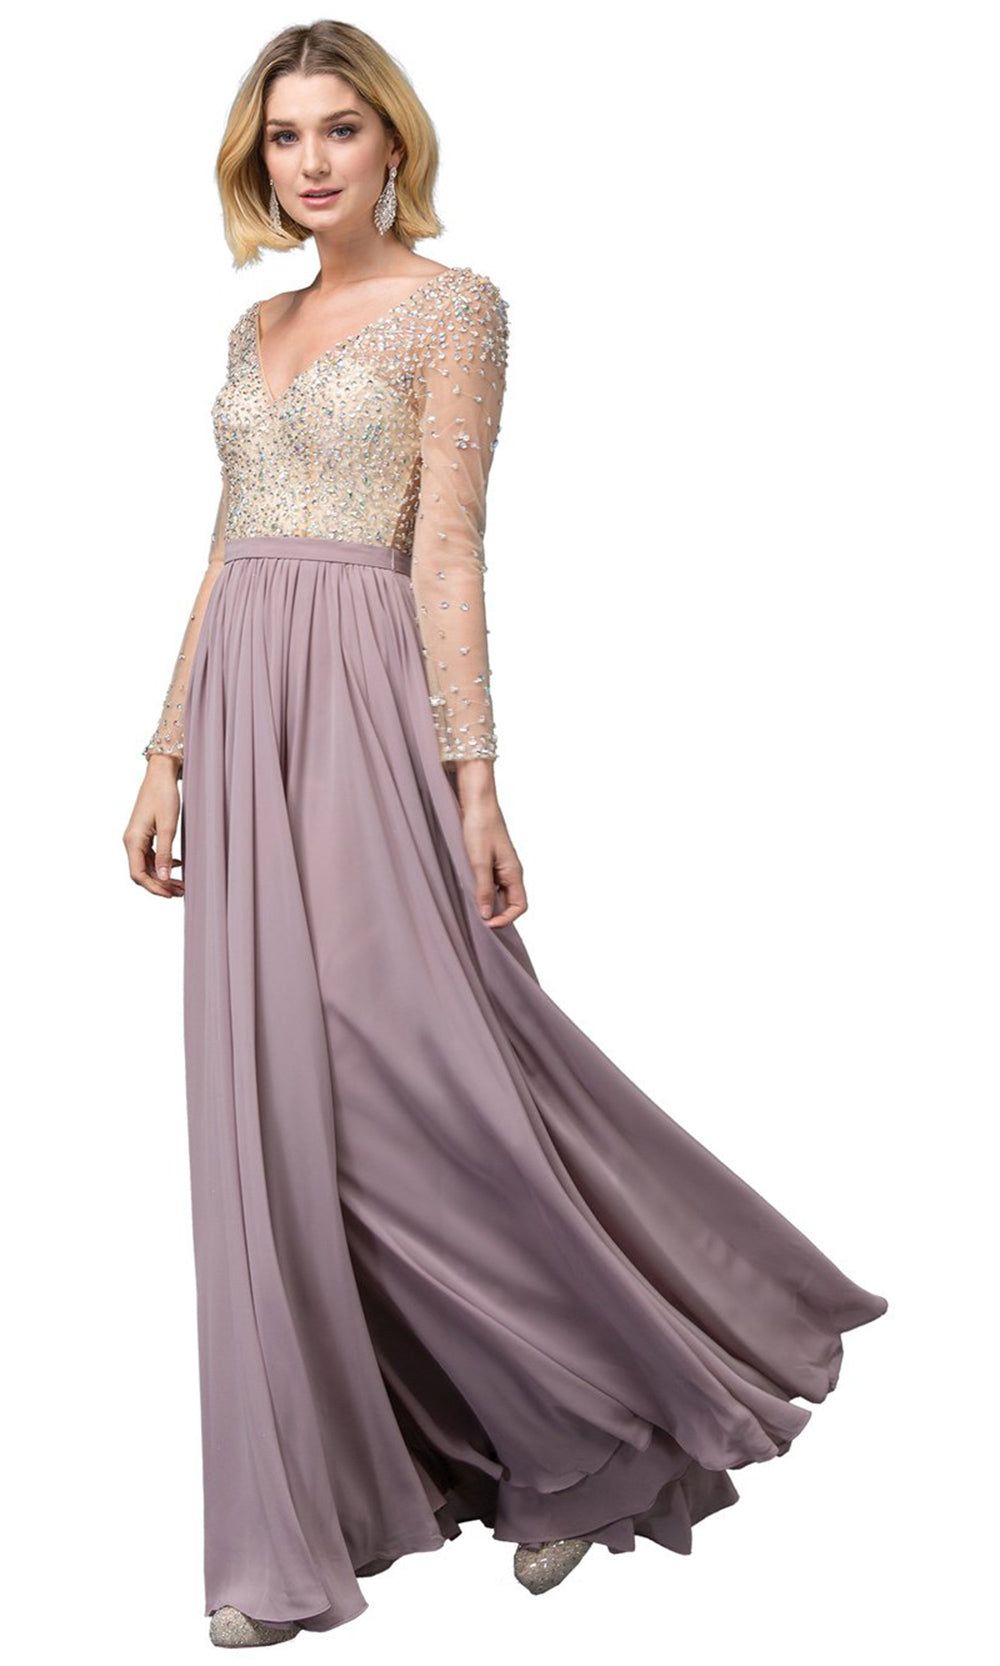 Dancing Queen - 2839 Jeweled Long Sleeve High Slit Dress In Pink